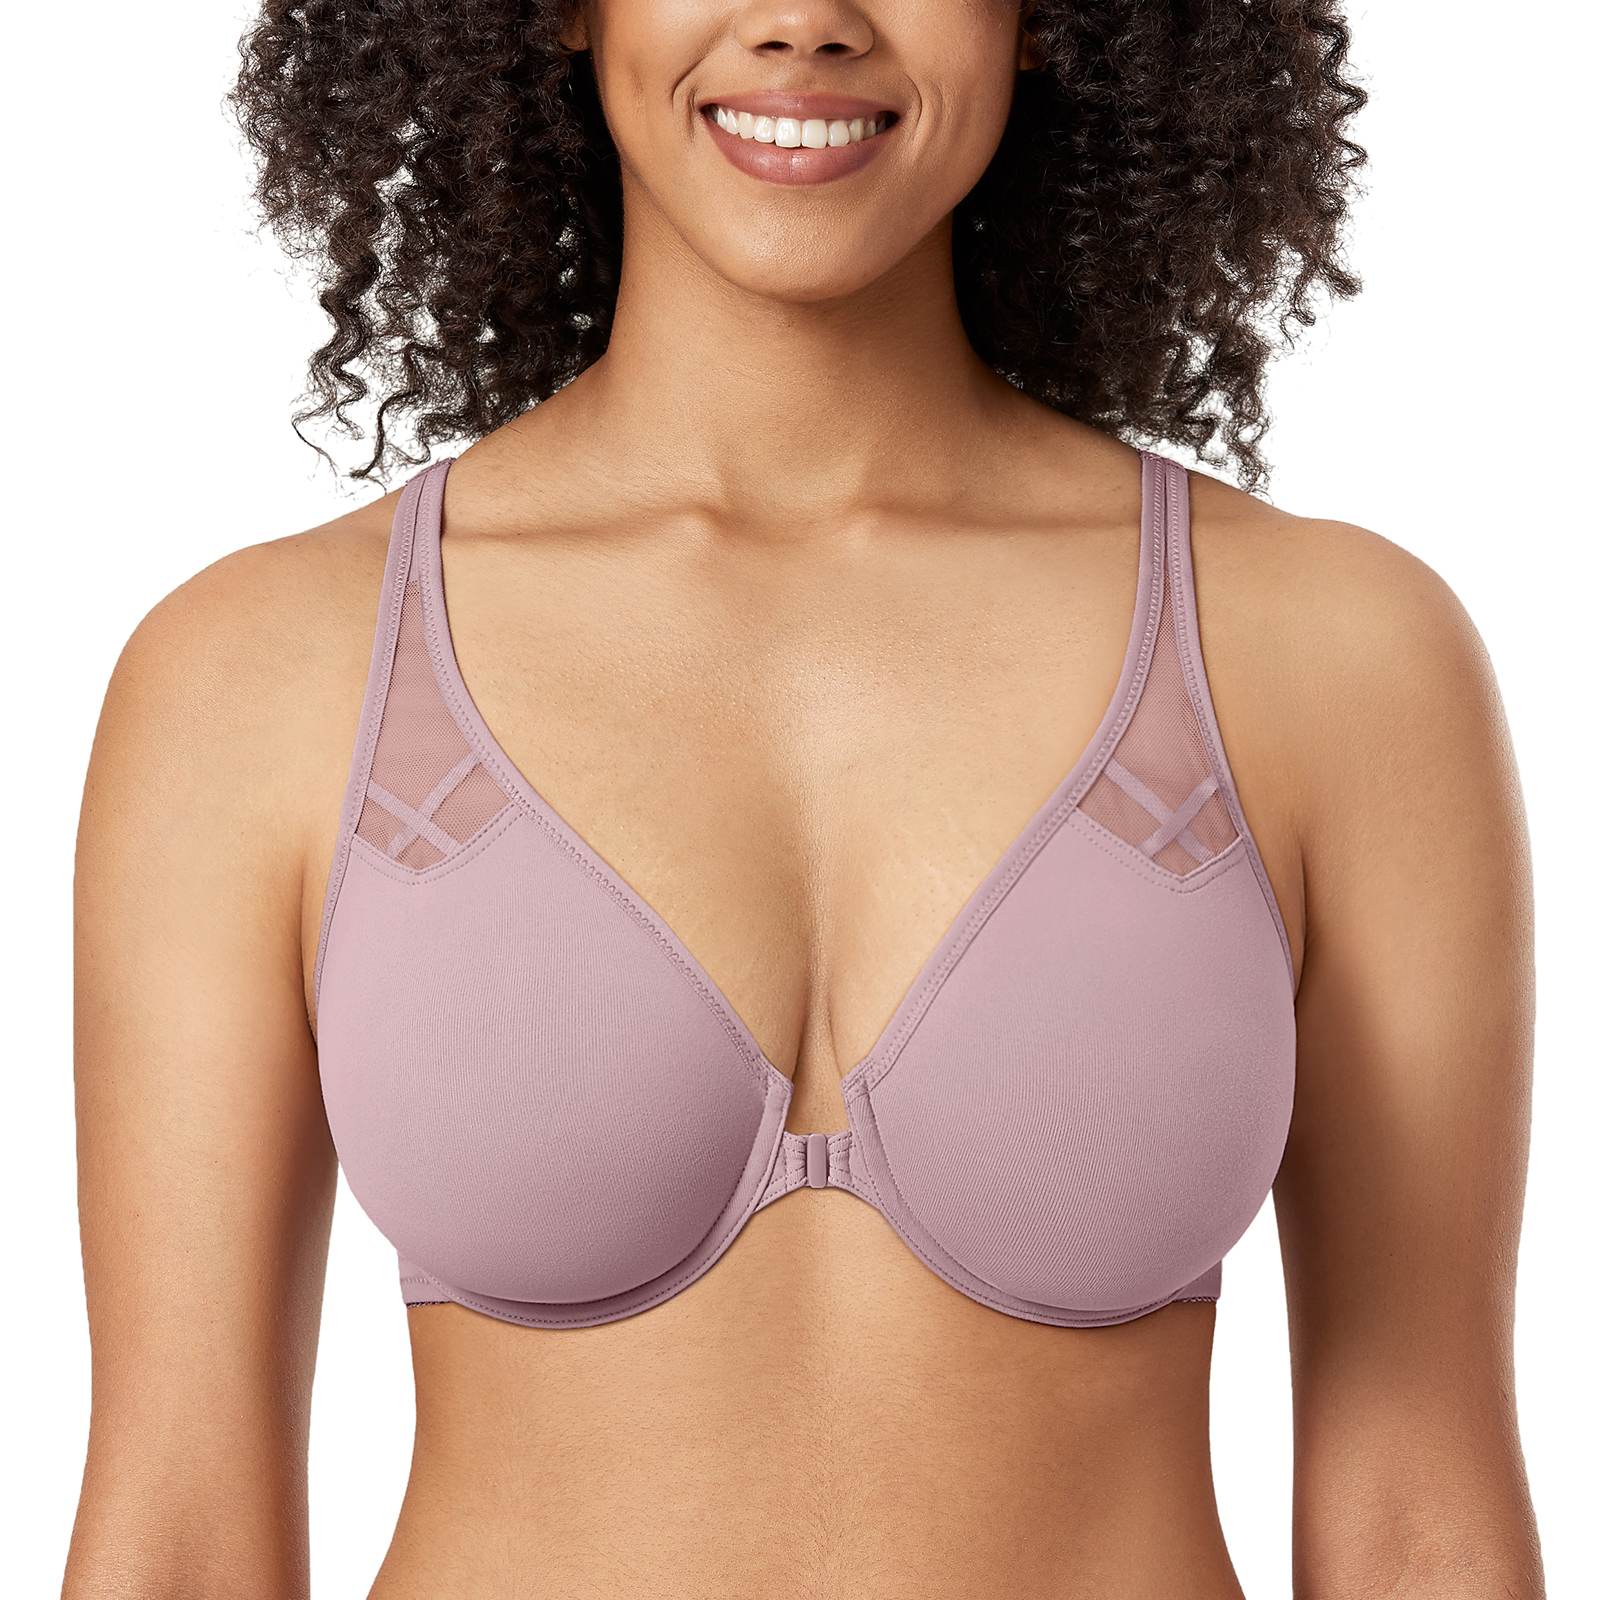 The Delimira full coverage bra has a built in back support to help